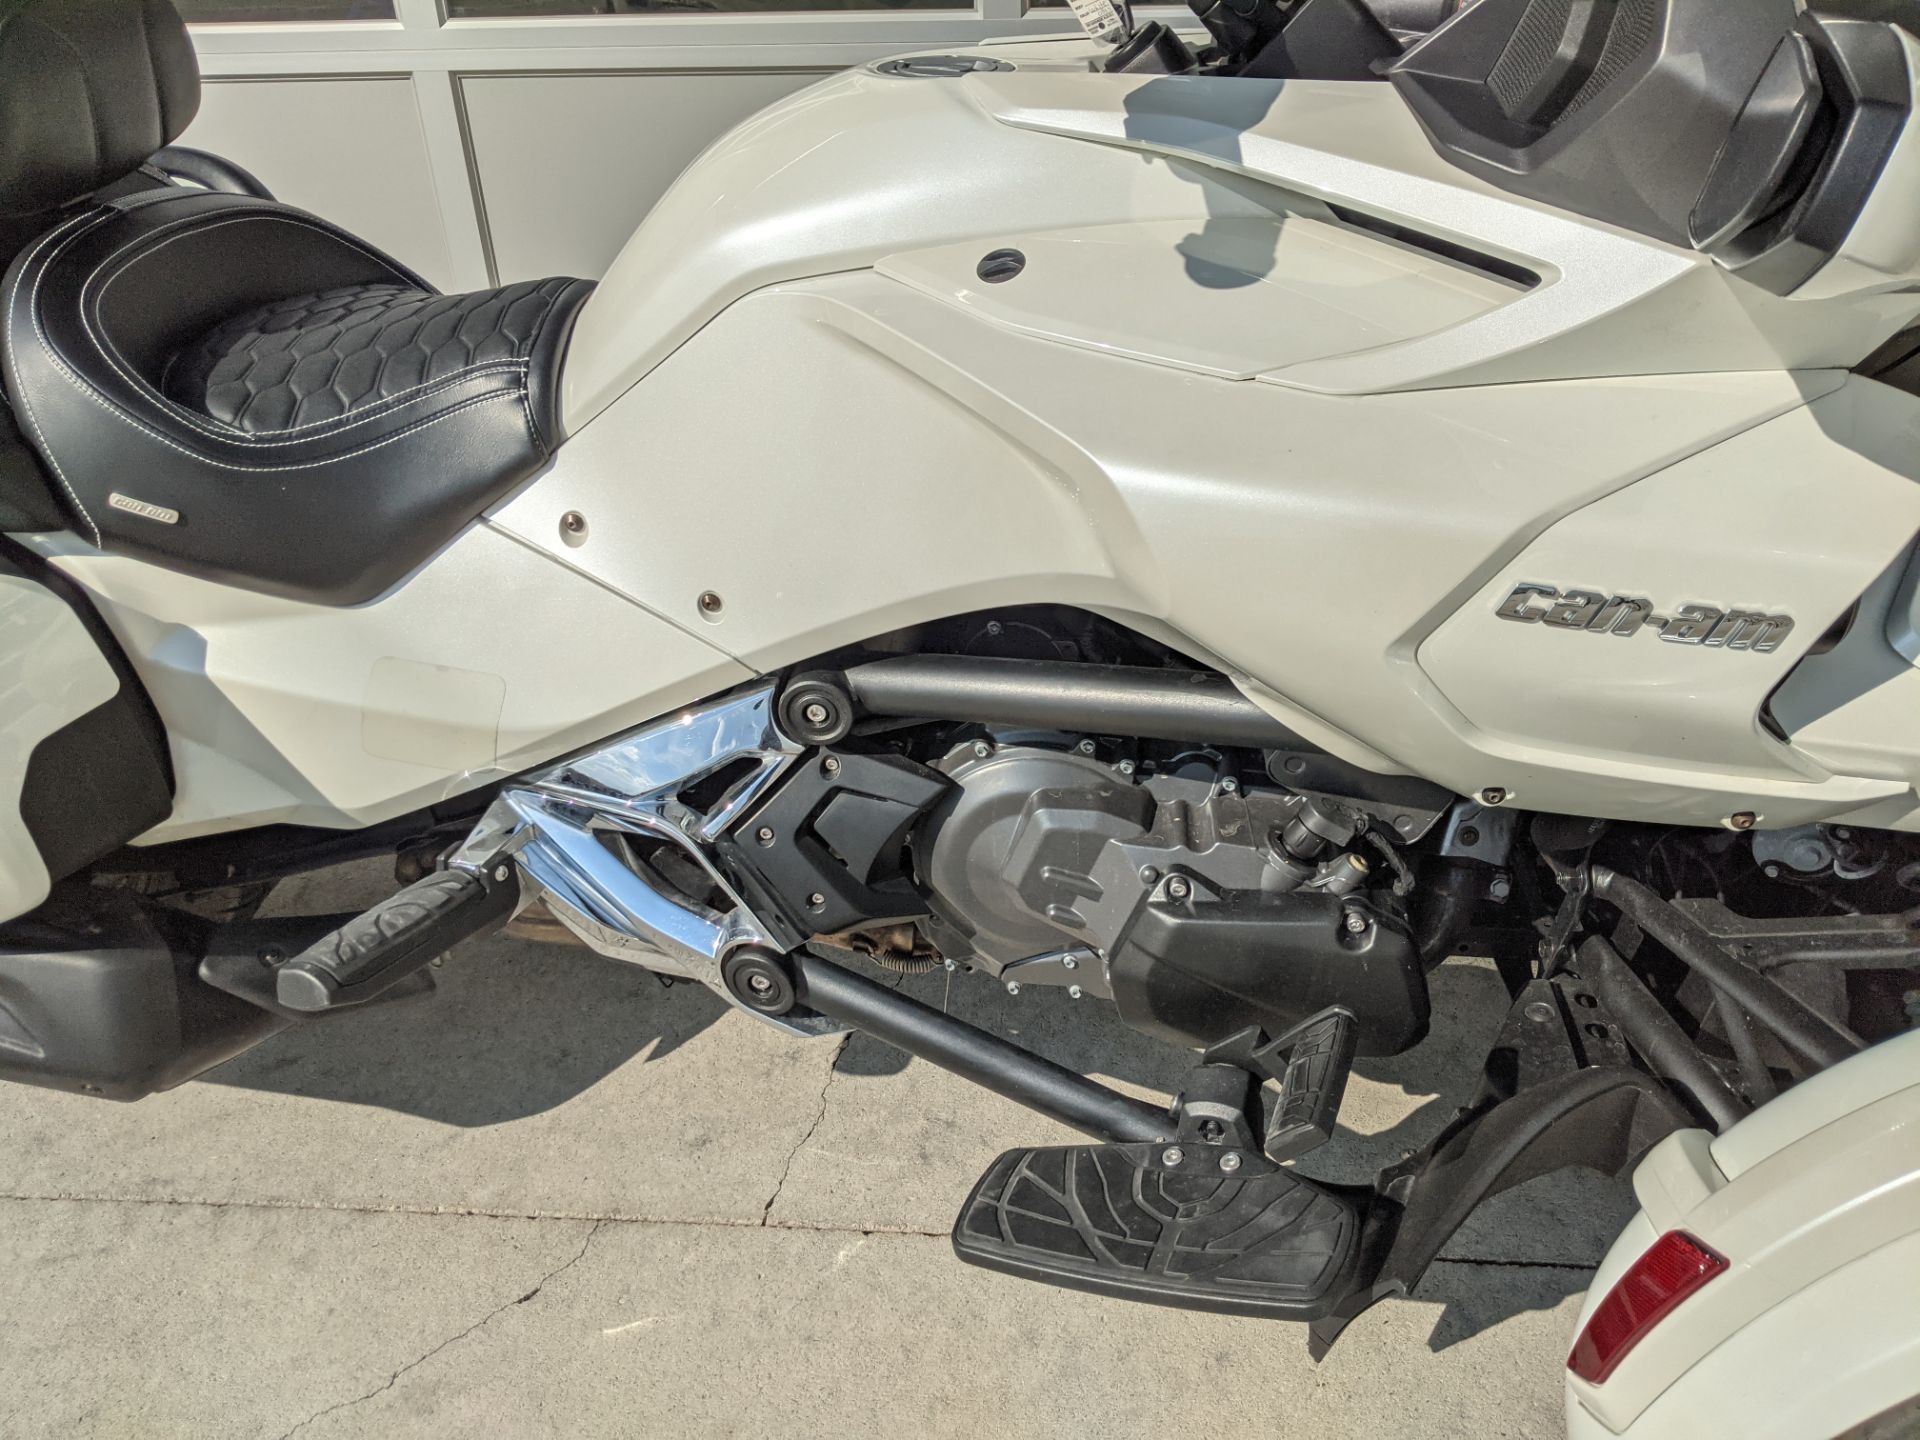 2016 Can-Am Spyder F3 Limited in Rapid City, South Dakota - Photo 8